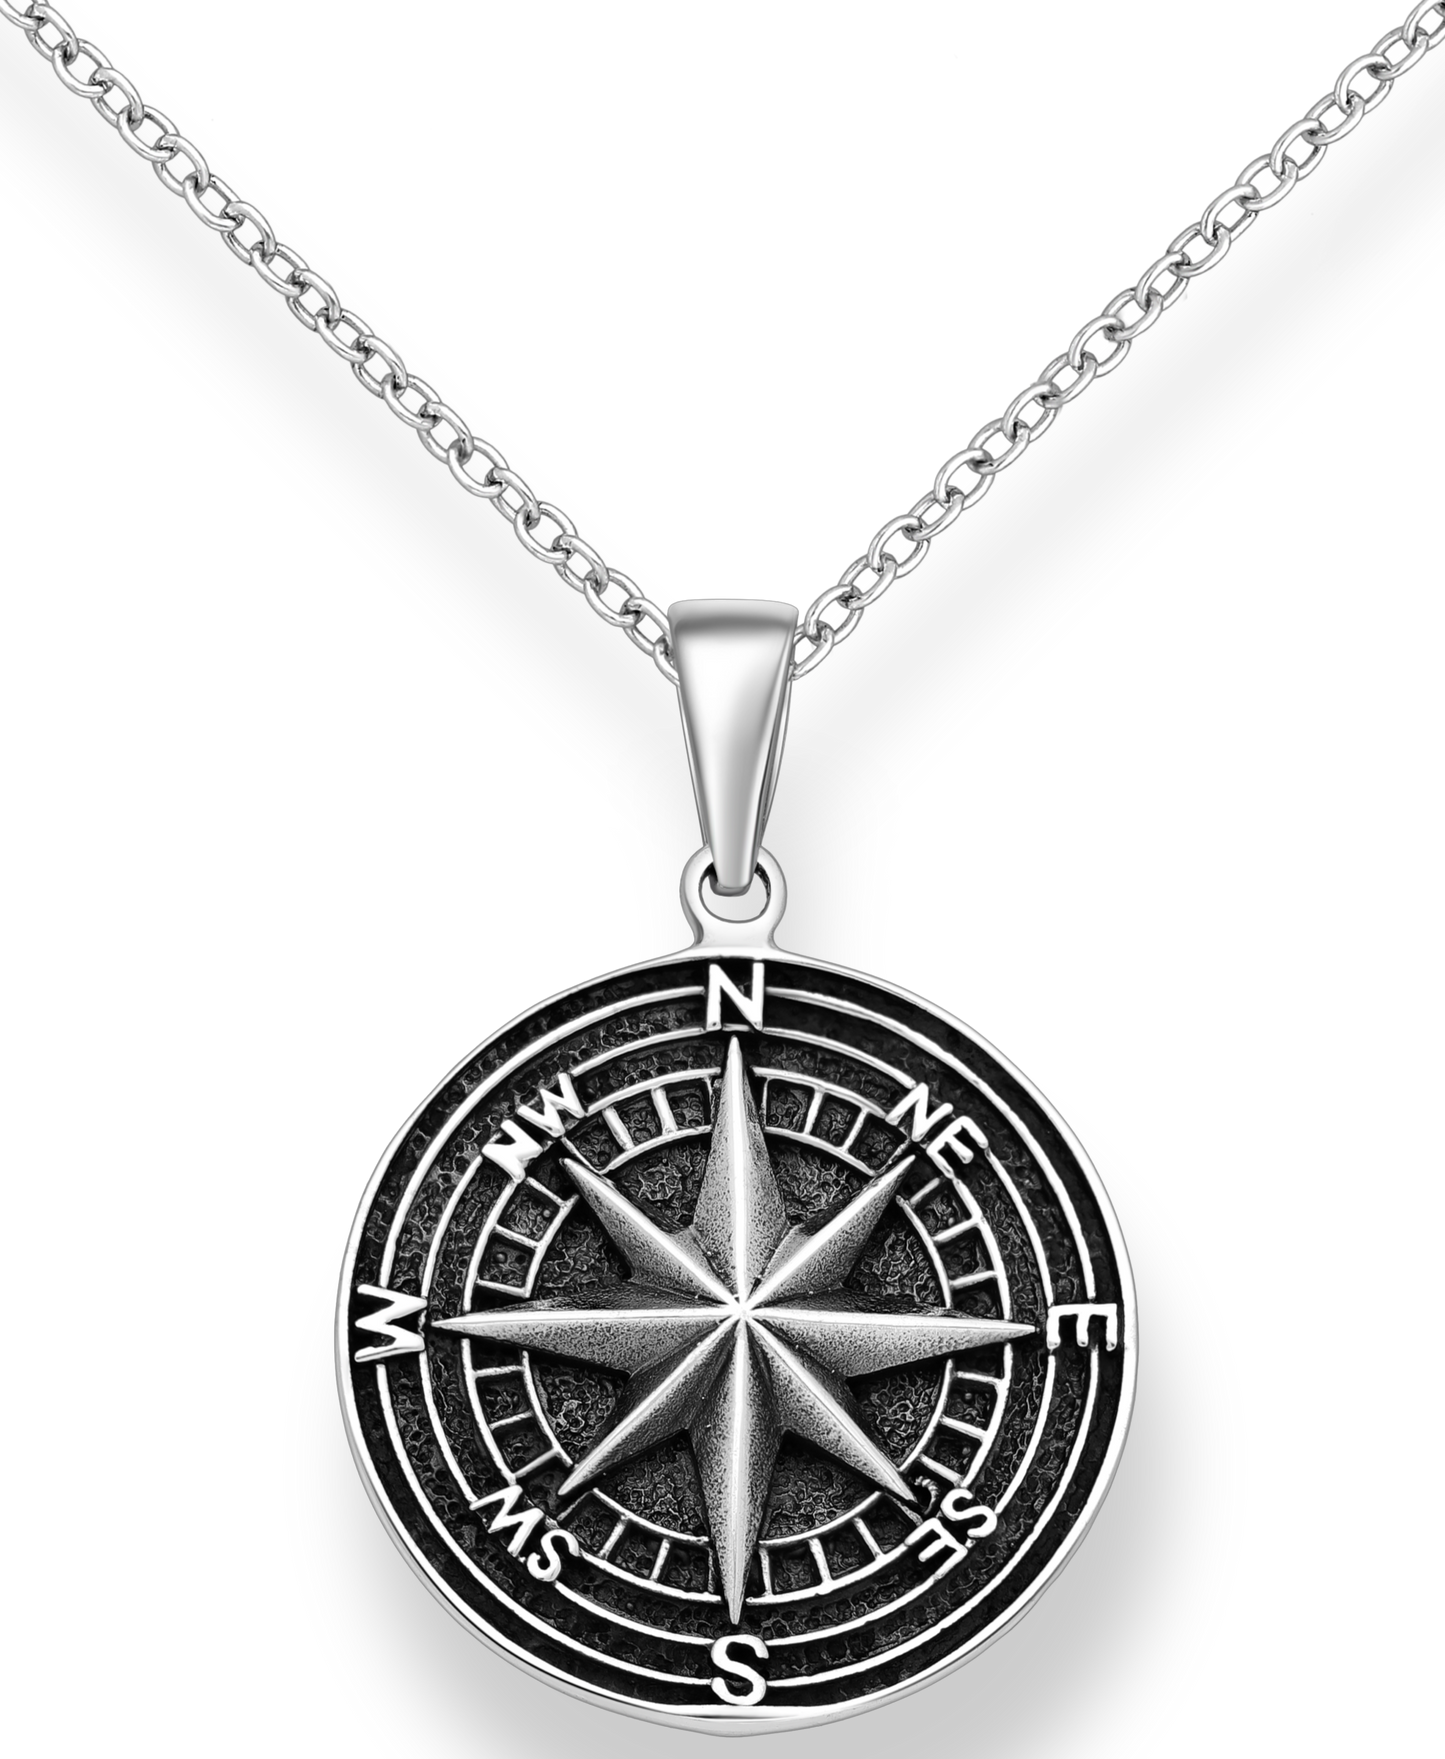 Sterling Silver Oxidized Compass Pendant